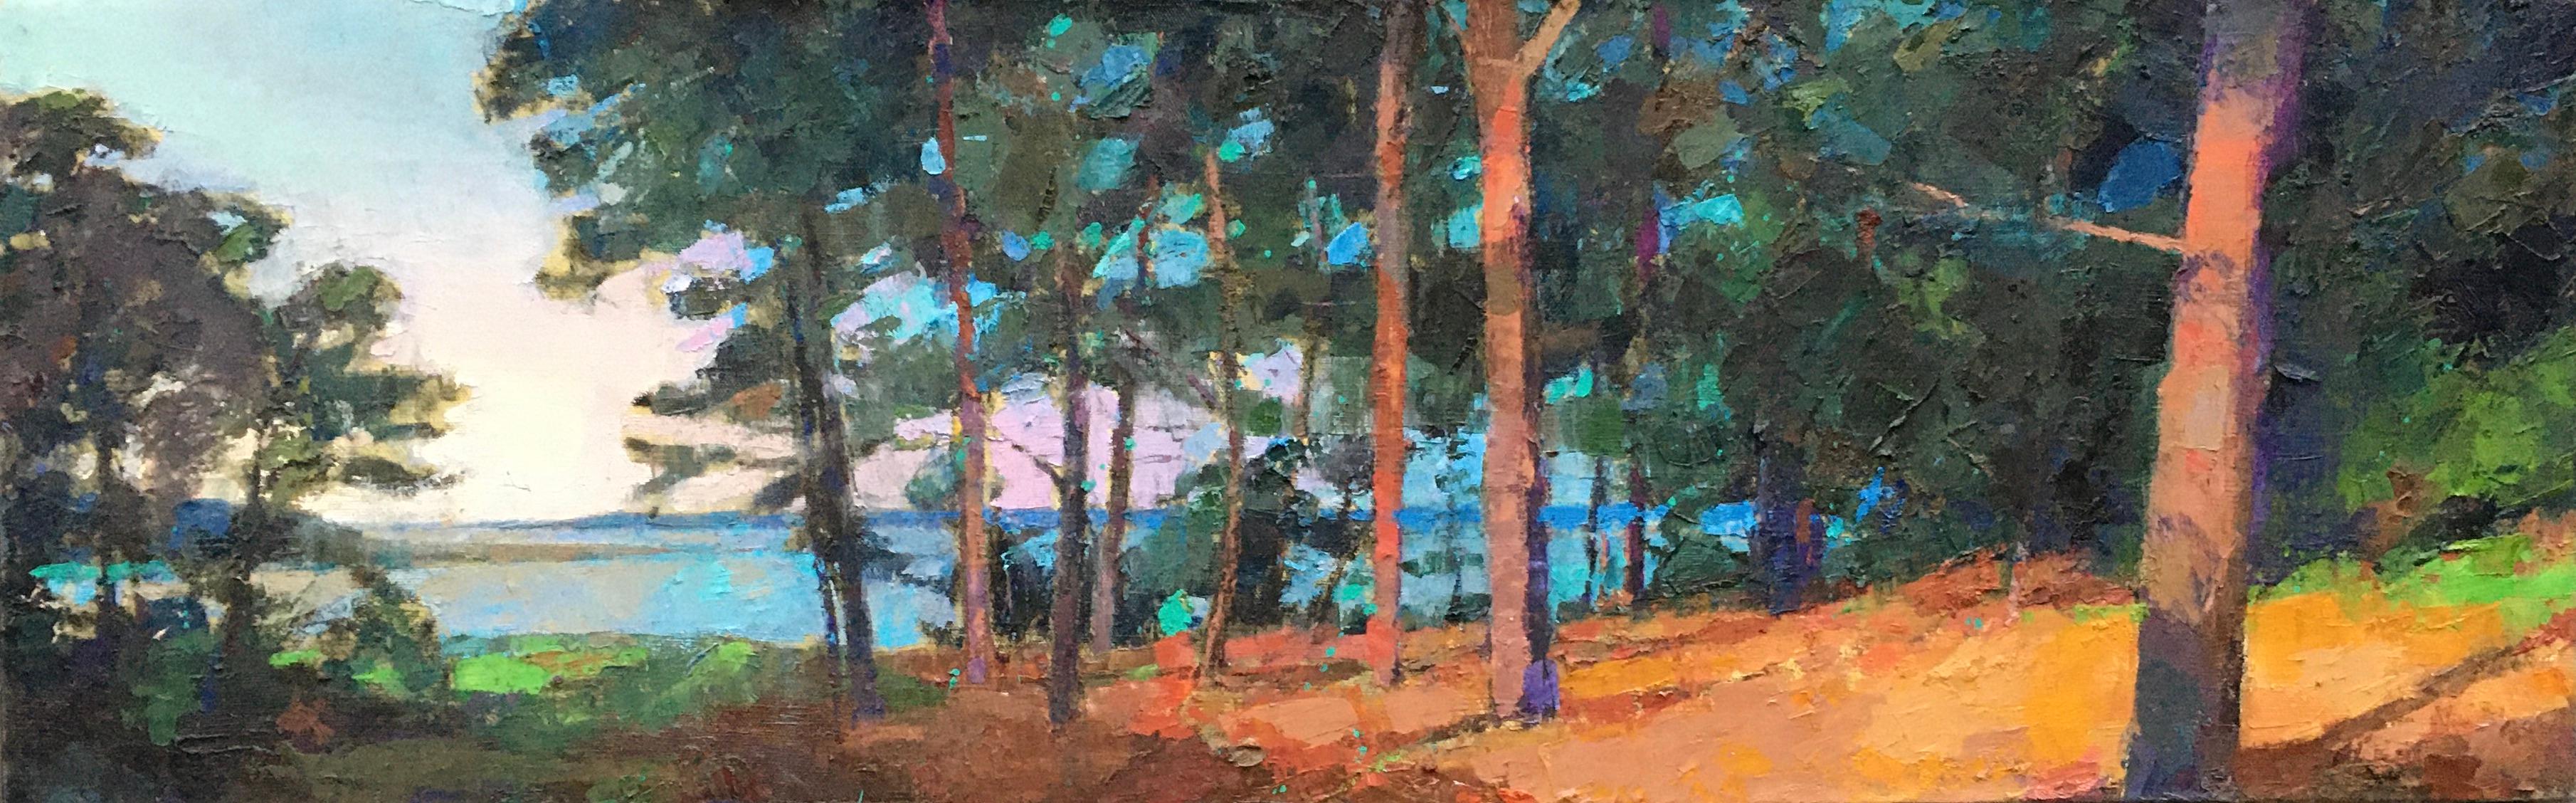 "Pine Forest" nature landscape of water - Painting by Larry Horowitz